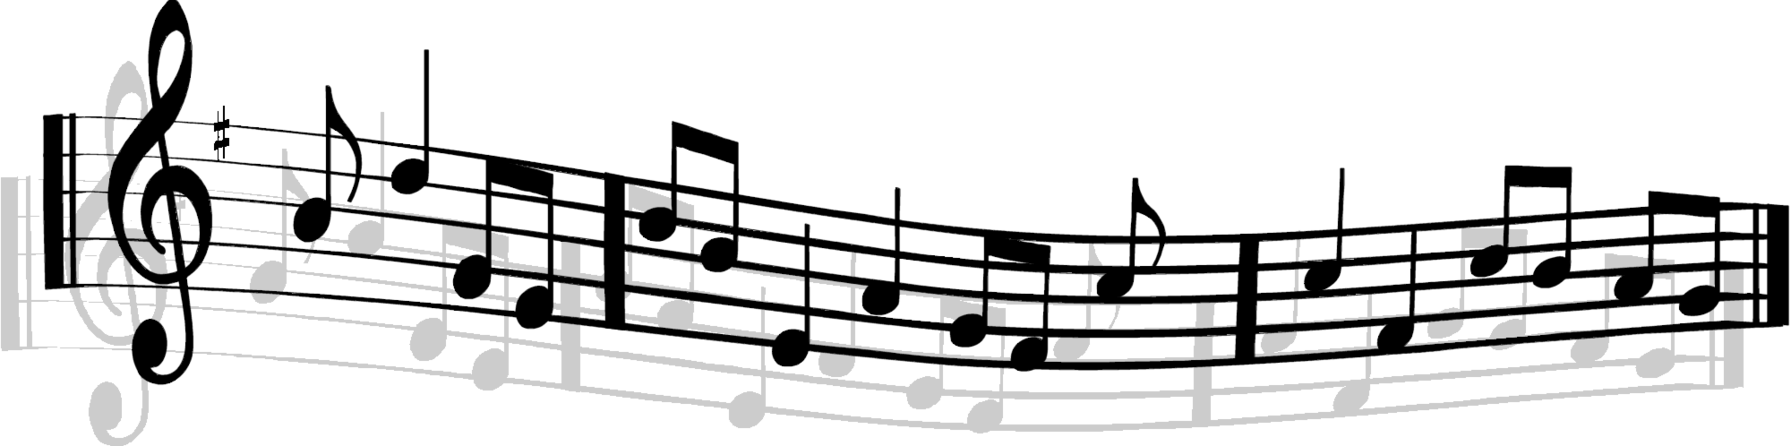 Music Staff Clipart Transparent - Free Clipart Images